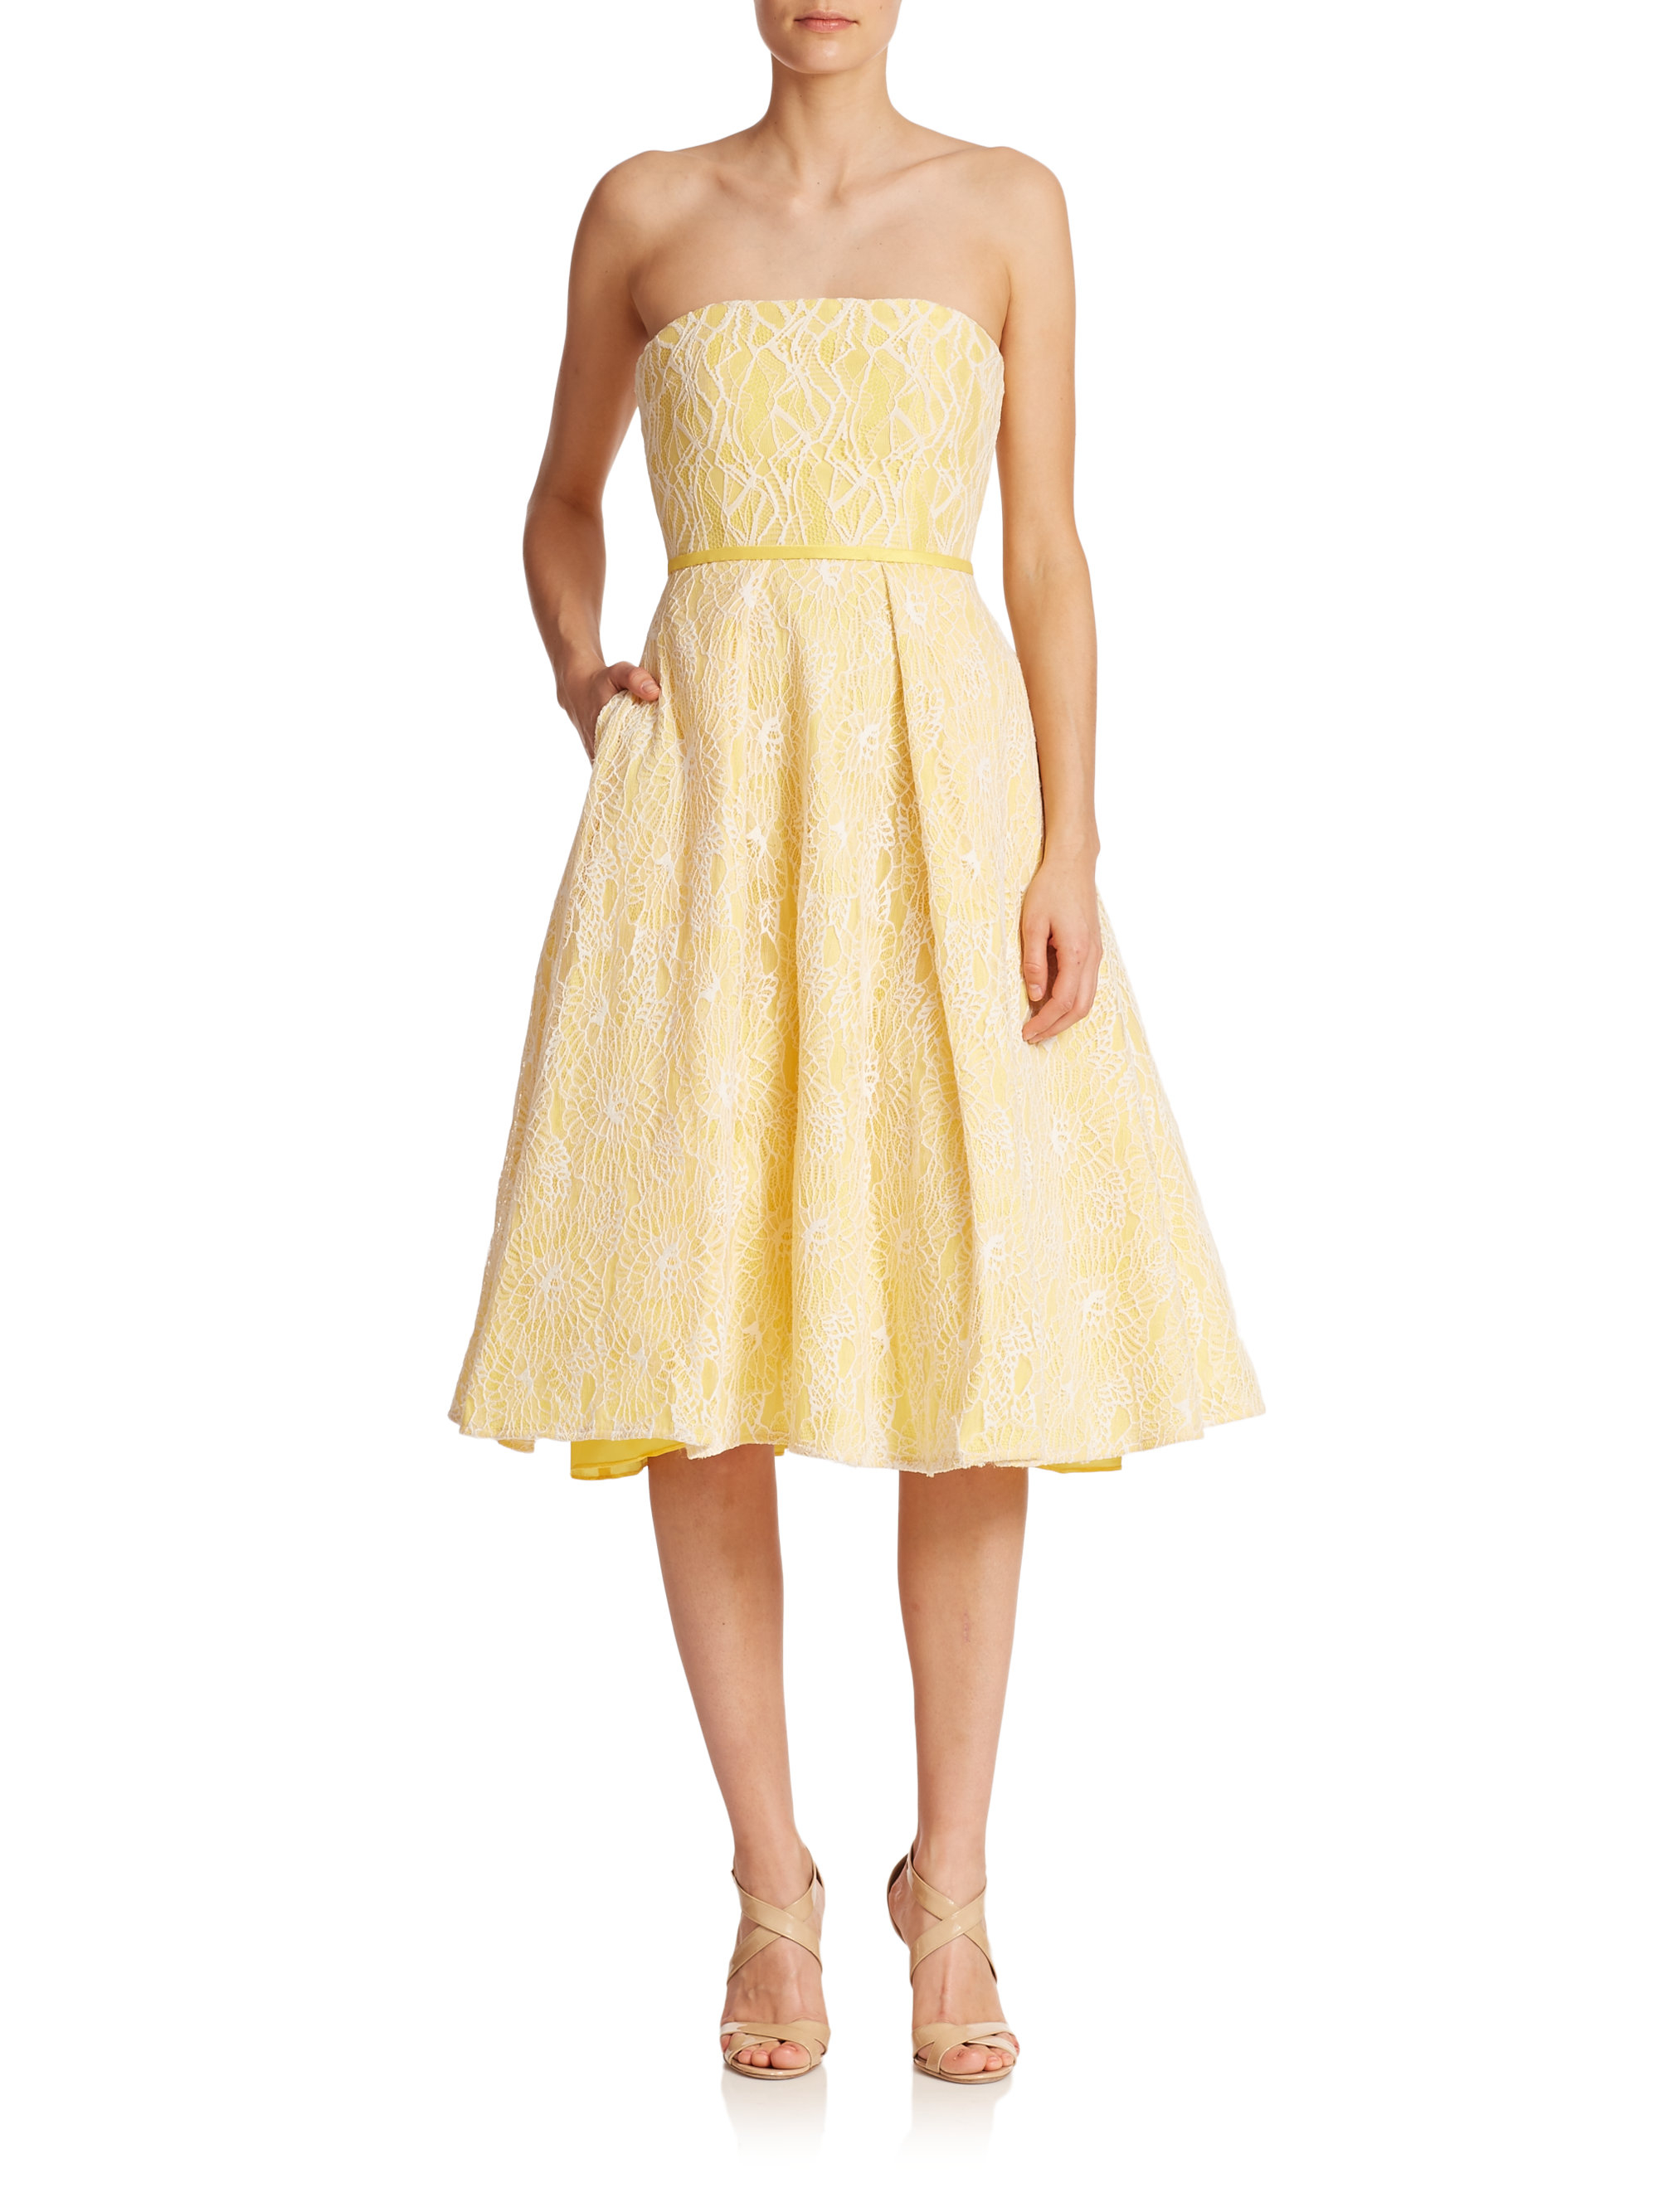 Lyst Ml Monique Lhuillier Strapless Lace Midi Dress In Yellow